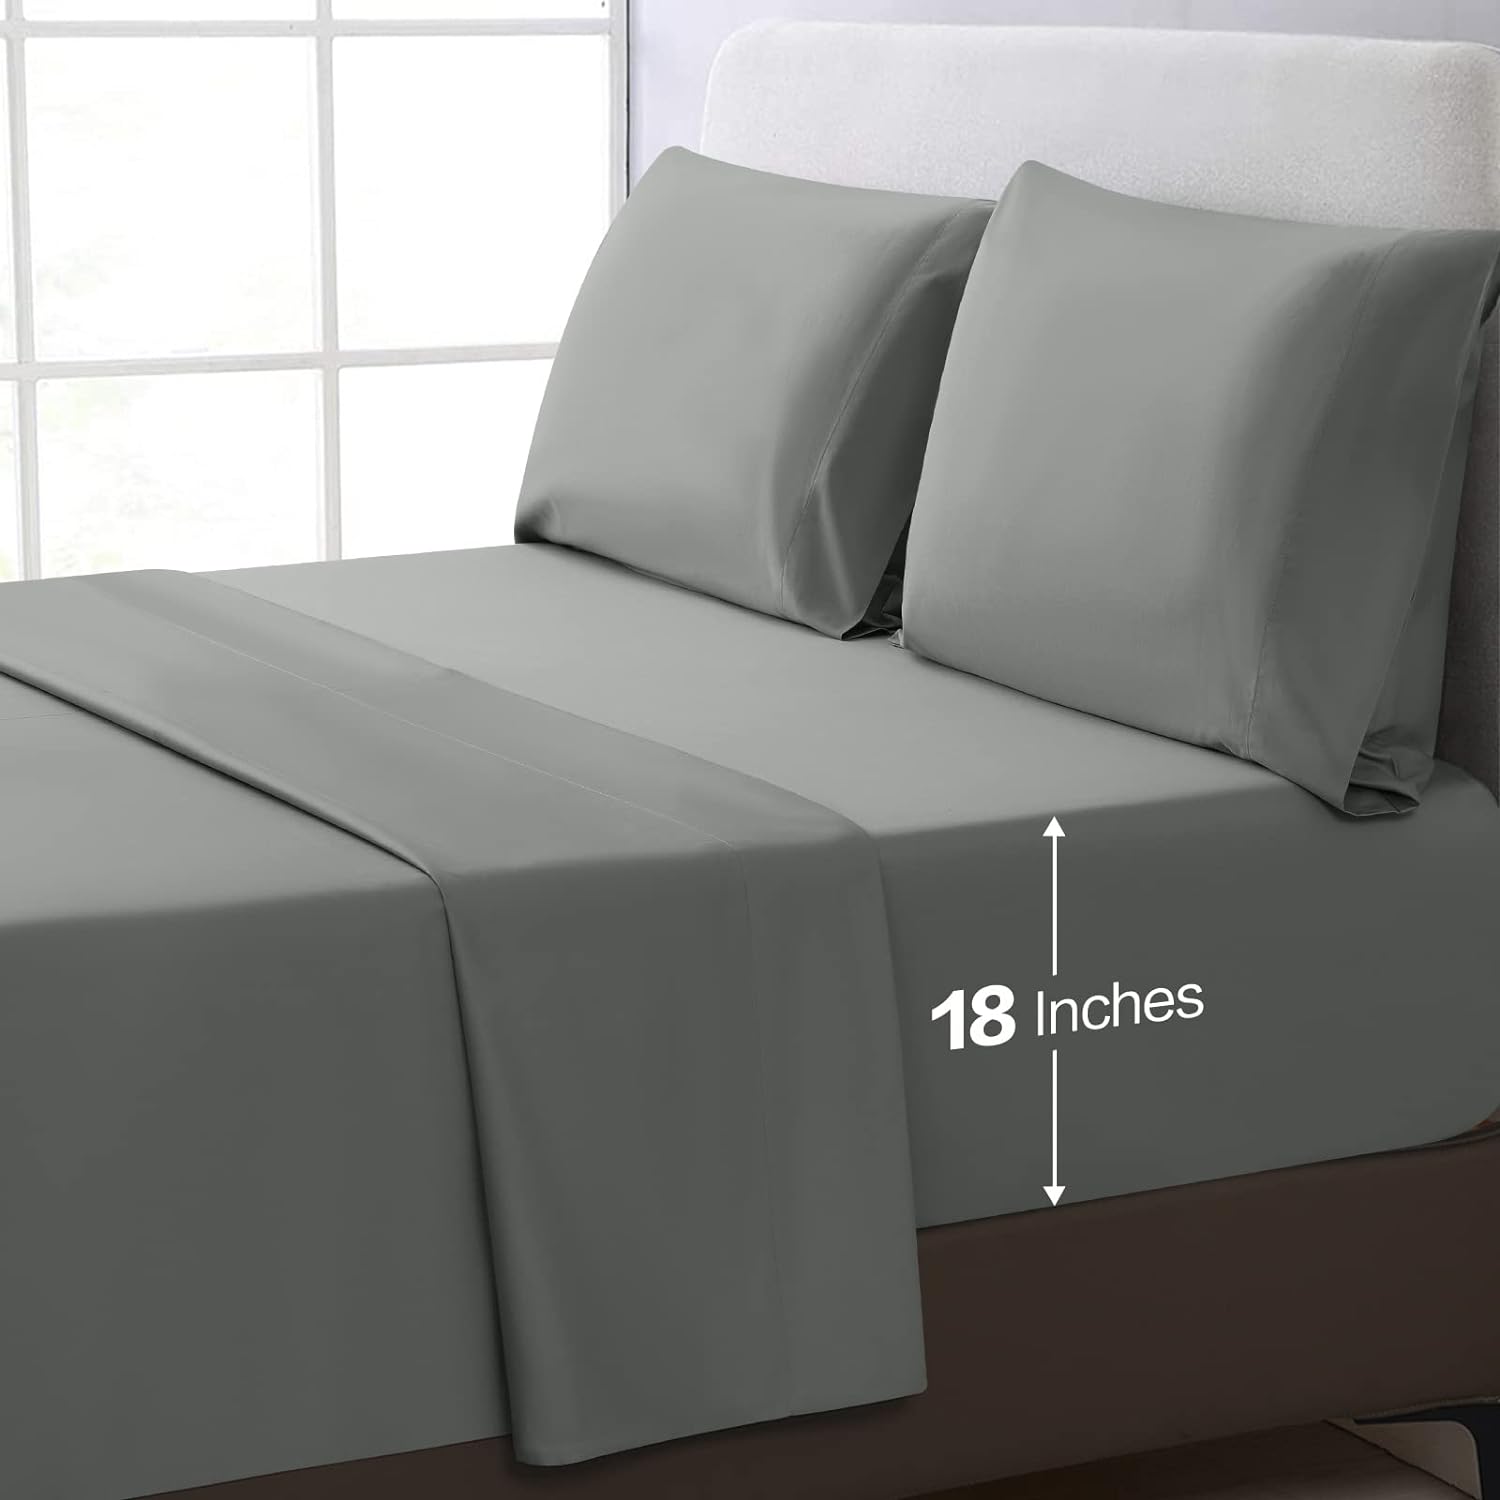 Percale Sheets Queen-Cotton Sheets for Queen Size Bed-18 inch Deep Pocket-400 Thread Count Egyptian Cotton 4 PCS Percale Grey Sheets Queen Hotel Style-Breathable and Crisp (Queen, Light Grey)